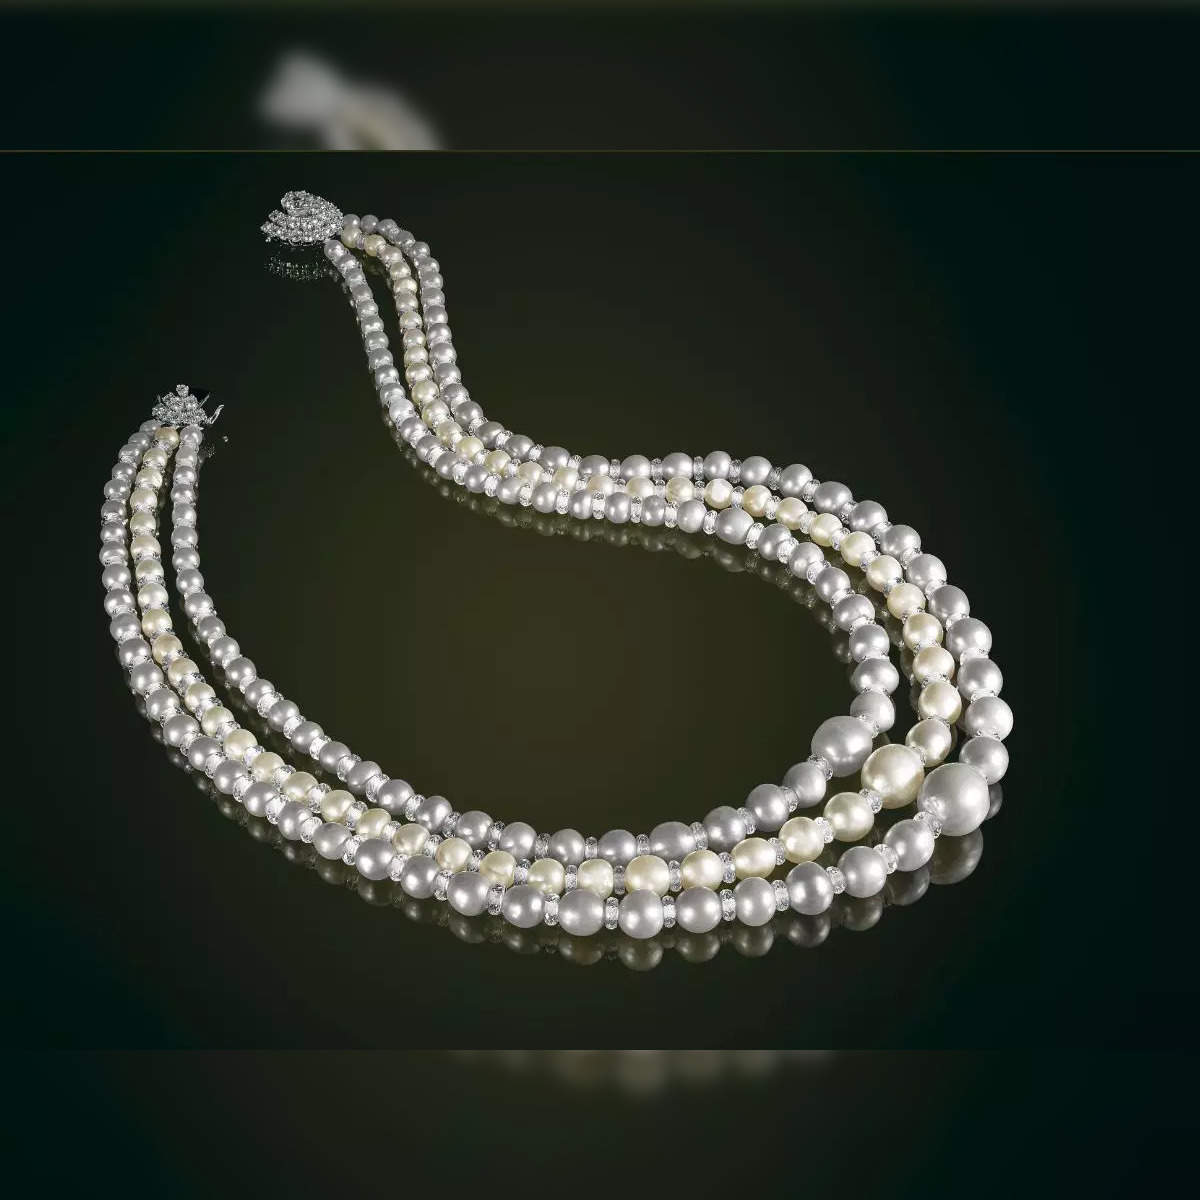 AstaGuru: Rare triple-strand pearl necklace fetches Rs 6.2 cr at AstaGuru's  online auction - The Economic Times